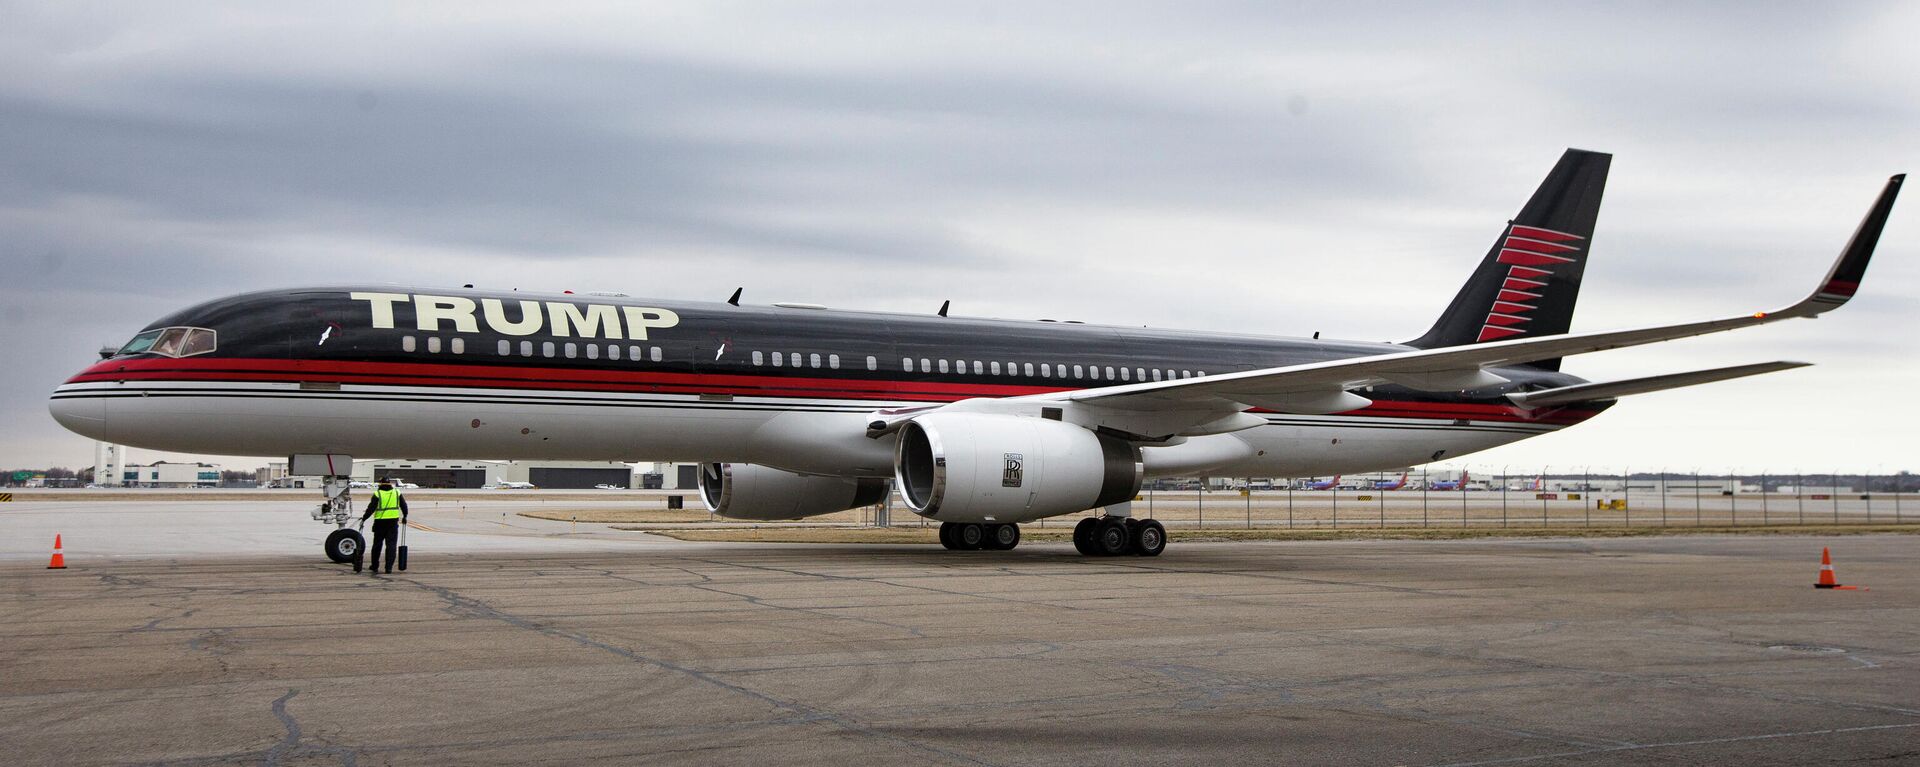 In this March 1, 2016 file photo, Republican presidential candidate Donald Trump's private jet arrives at Port-Columbus International Airport, in Columbus, Ohio. President Donald Trump's private jet, an instantly recognizable Boeing 757 used during his campaign, was caught up in a quintessential New York City traffic mishap at LaGuardia Airport on Wednesday, Nov. 28, 2018: a fender bender while someone else was trying to park. A corporate jet maneuvering into a parking spot clipped the wing of Trump's parked plane around 8:30 a.m., Trump's company, The Trump Organization, confirmed. - Sputnik International, 1920, 15.03.2022